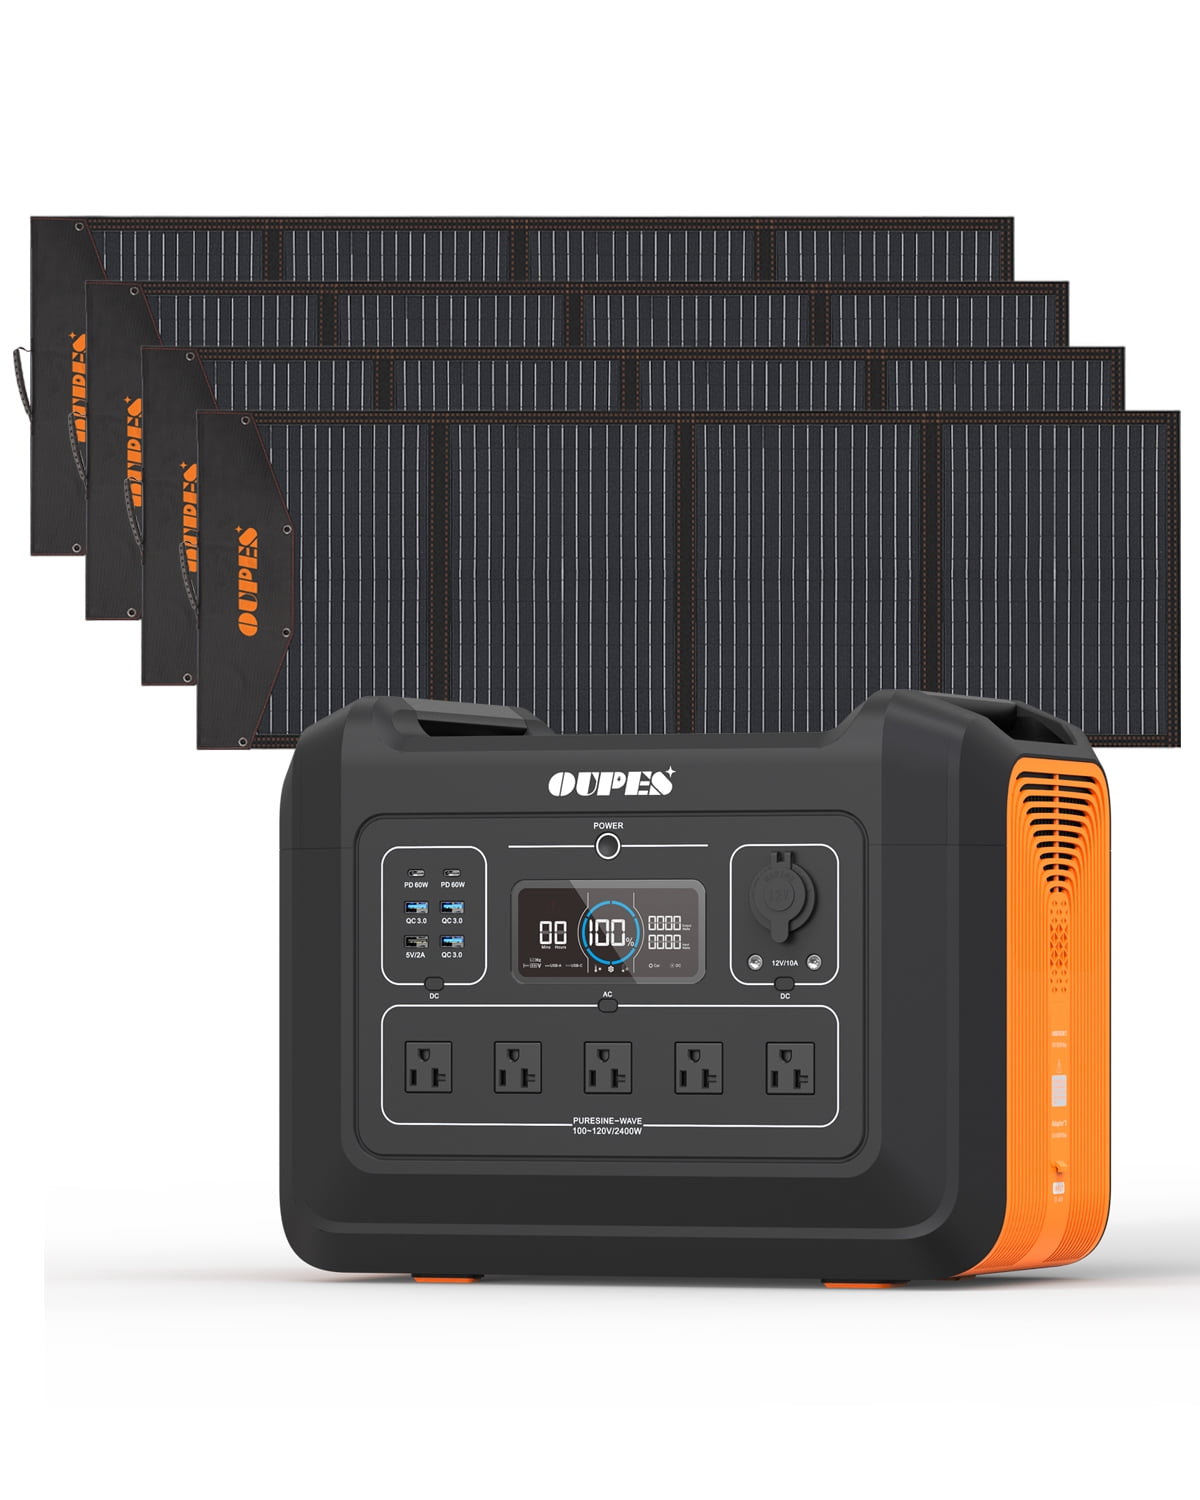  AFERIY Portable Powerstation 1200W, Solar Generator  1248Wh/390000mAh LiFePO4 Battery mit UPS, 2AC Outputs (2400W Peak), 11  Sockets Power Storage for Outdoor, Camping in Motorhome Backup   Review Analysis